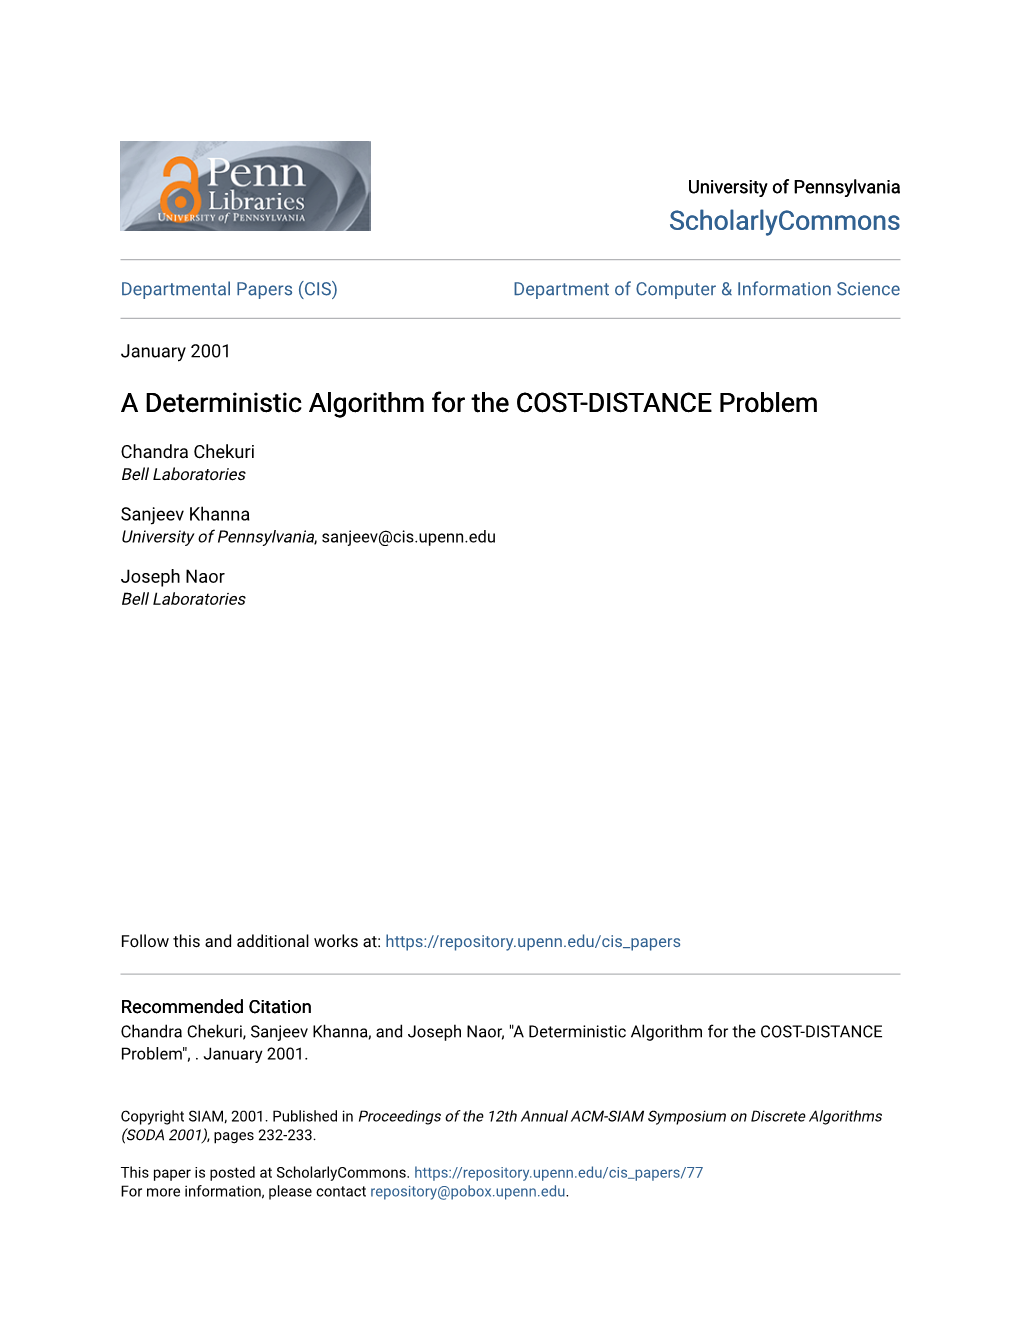 A Deterministic Algorithm for the COST-DISTANCE Problem